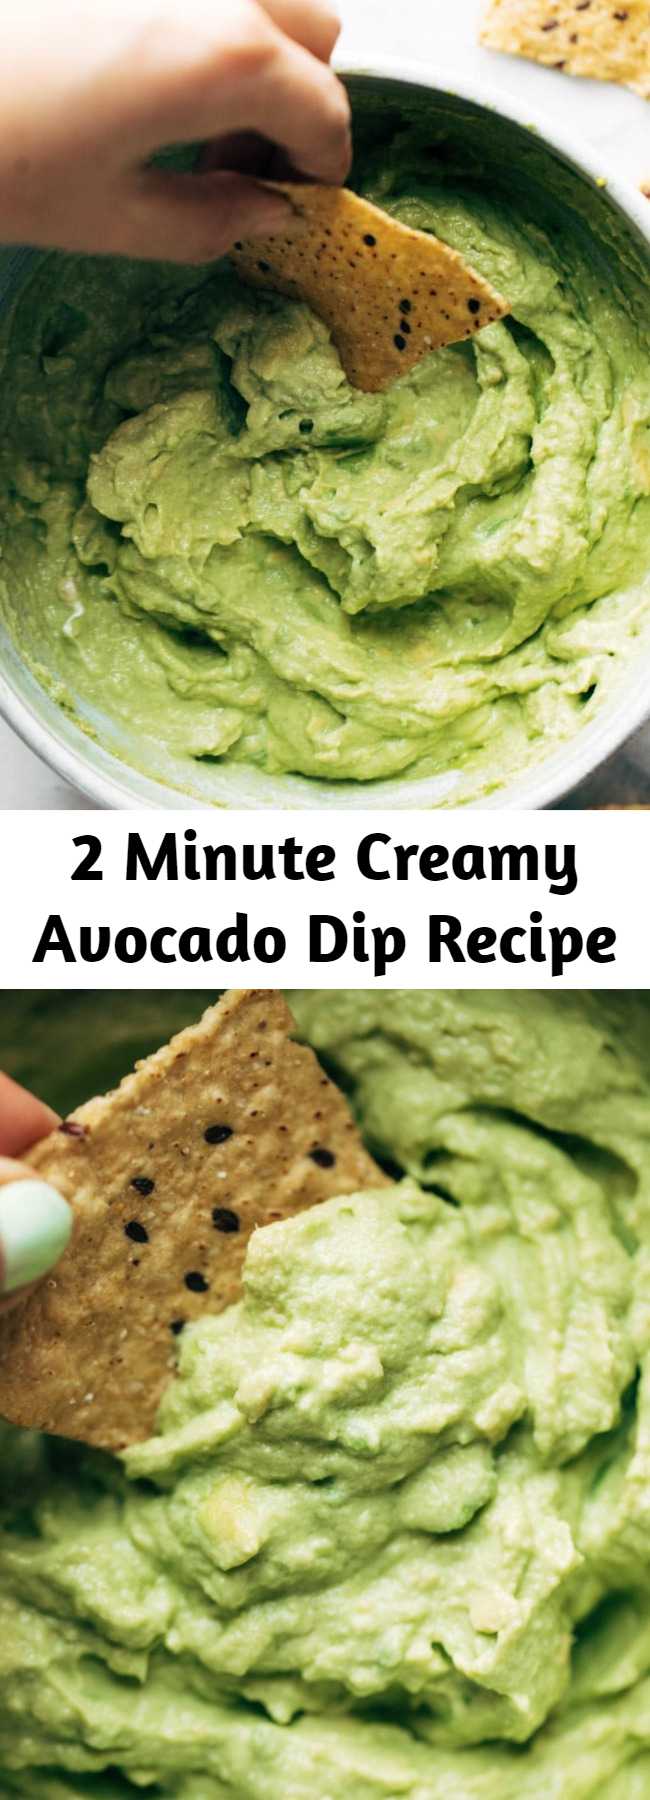 2 Minute Creamy Avocado Dip Recipe - Creamy Avocado Dip that comes together with less than five ingredients in two minutes flat! This is the BEST easy, healthy snack. Also a great spread for tacos. #dip #avocado #avocadodip #cleaneating